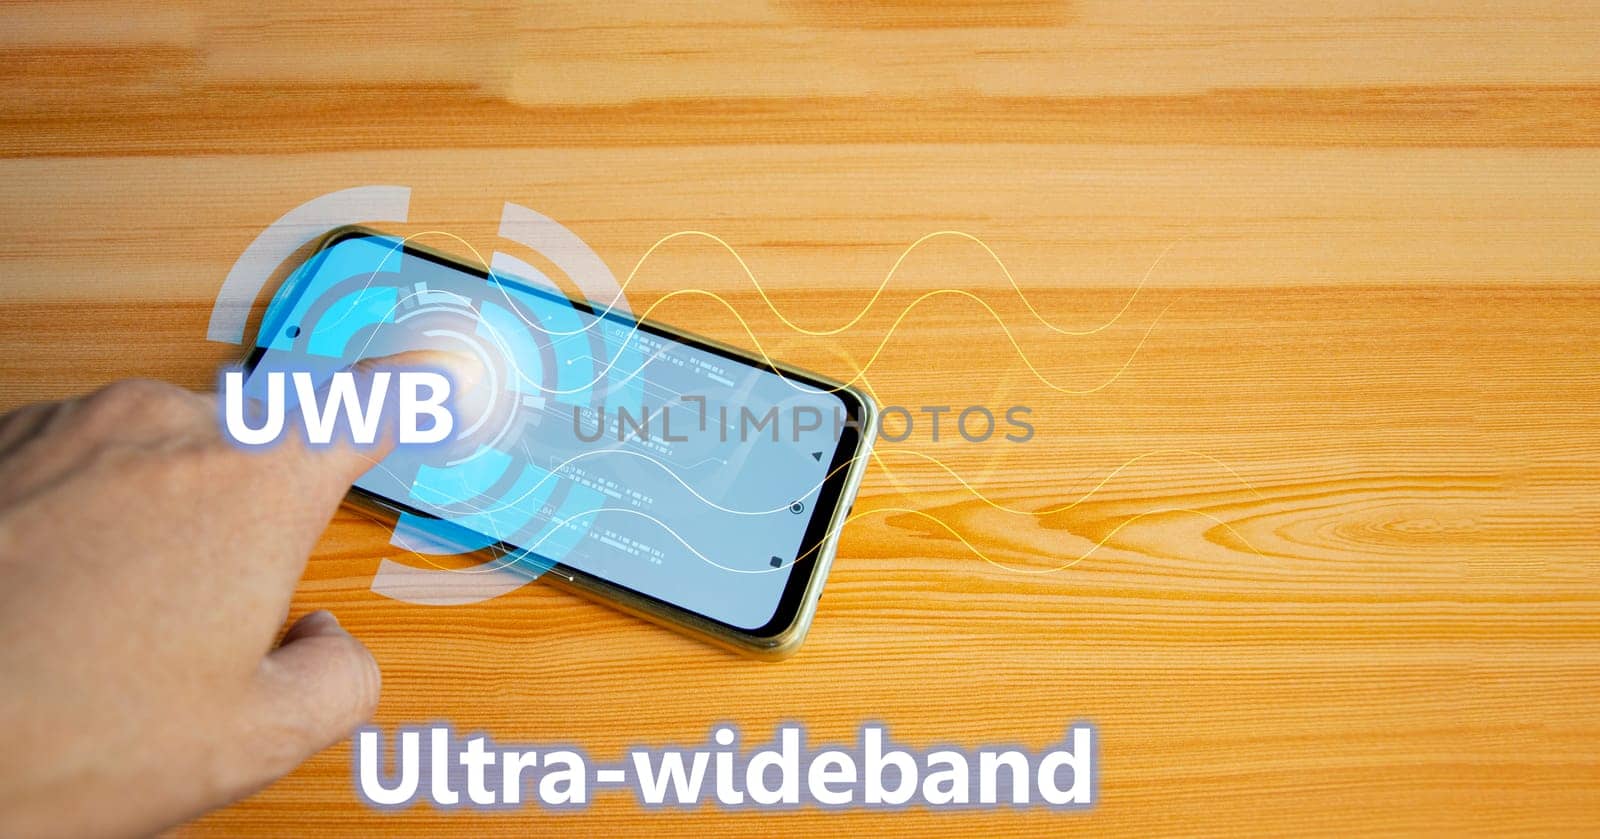 Ultra-wideband UWB is a short-range radio communication technology on bandwidths of 500MHz or greater and at very high frequencies. Overall, it works similarly to Bluetooth and Wi-Fi(not a trademark) by boonruen